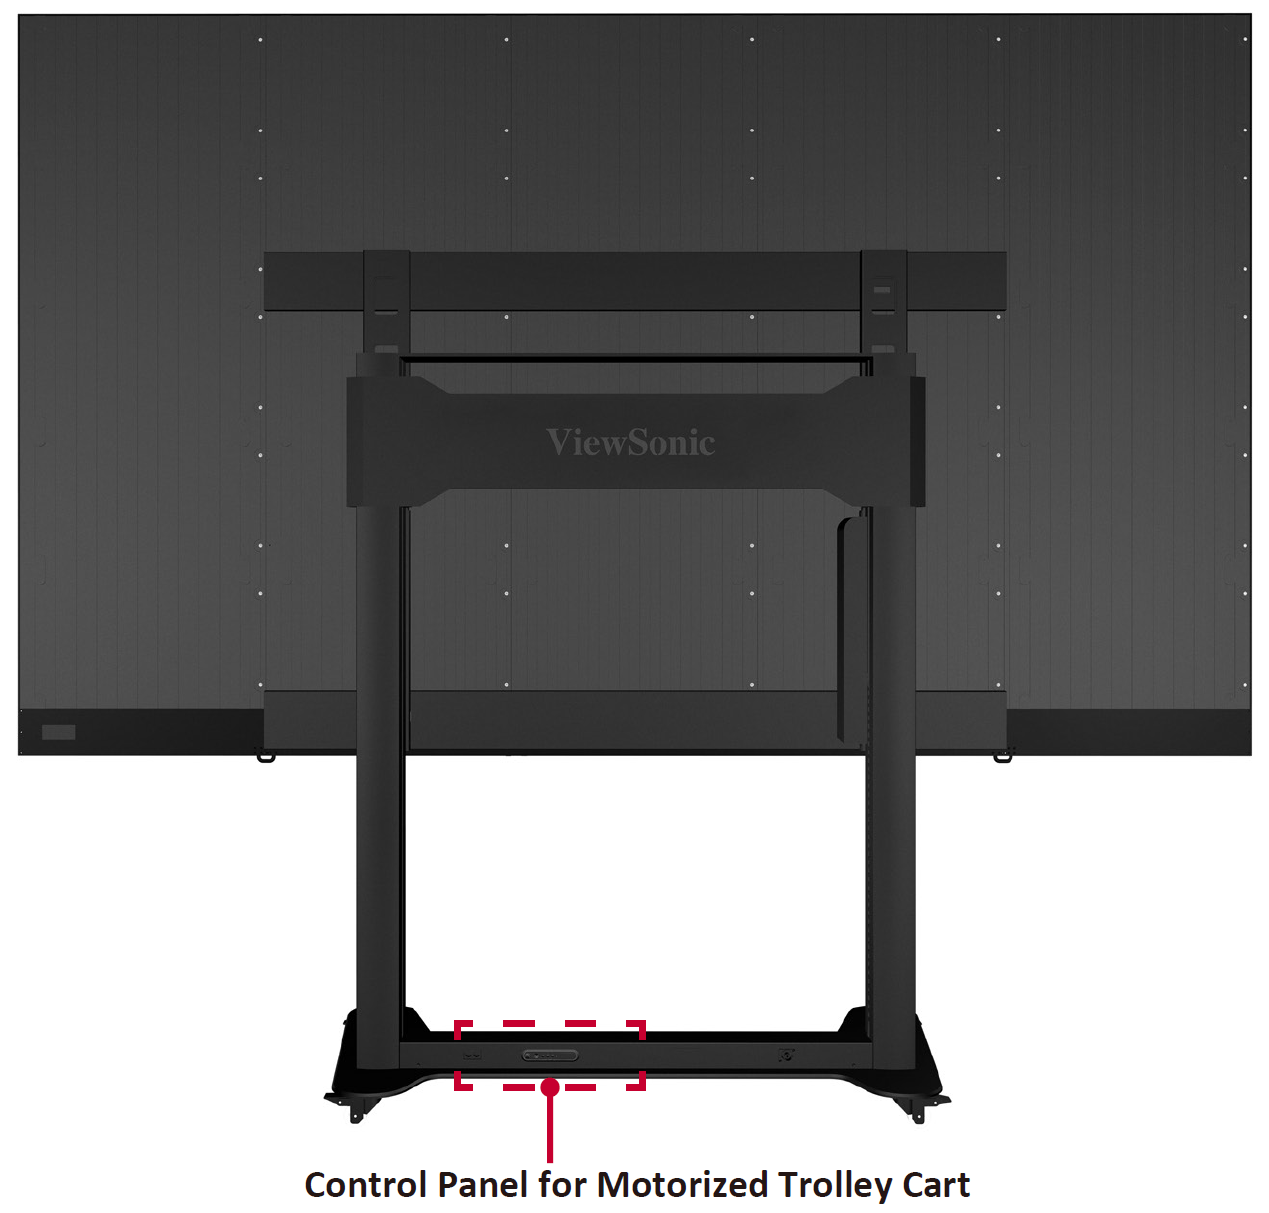 LDS135-151 Rear Panel Overview.png